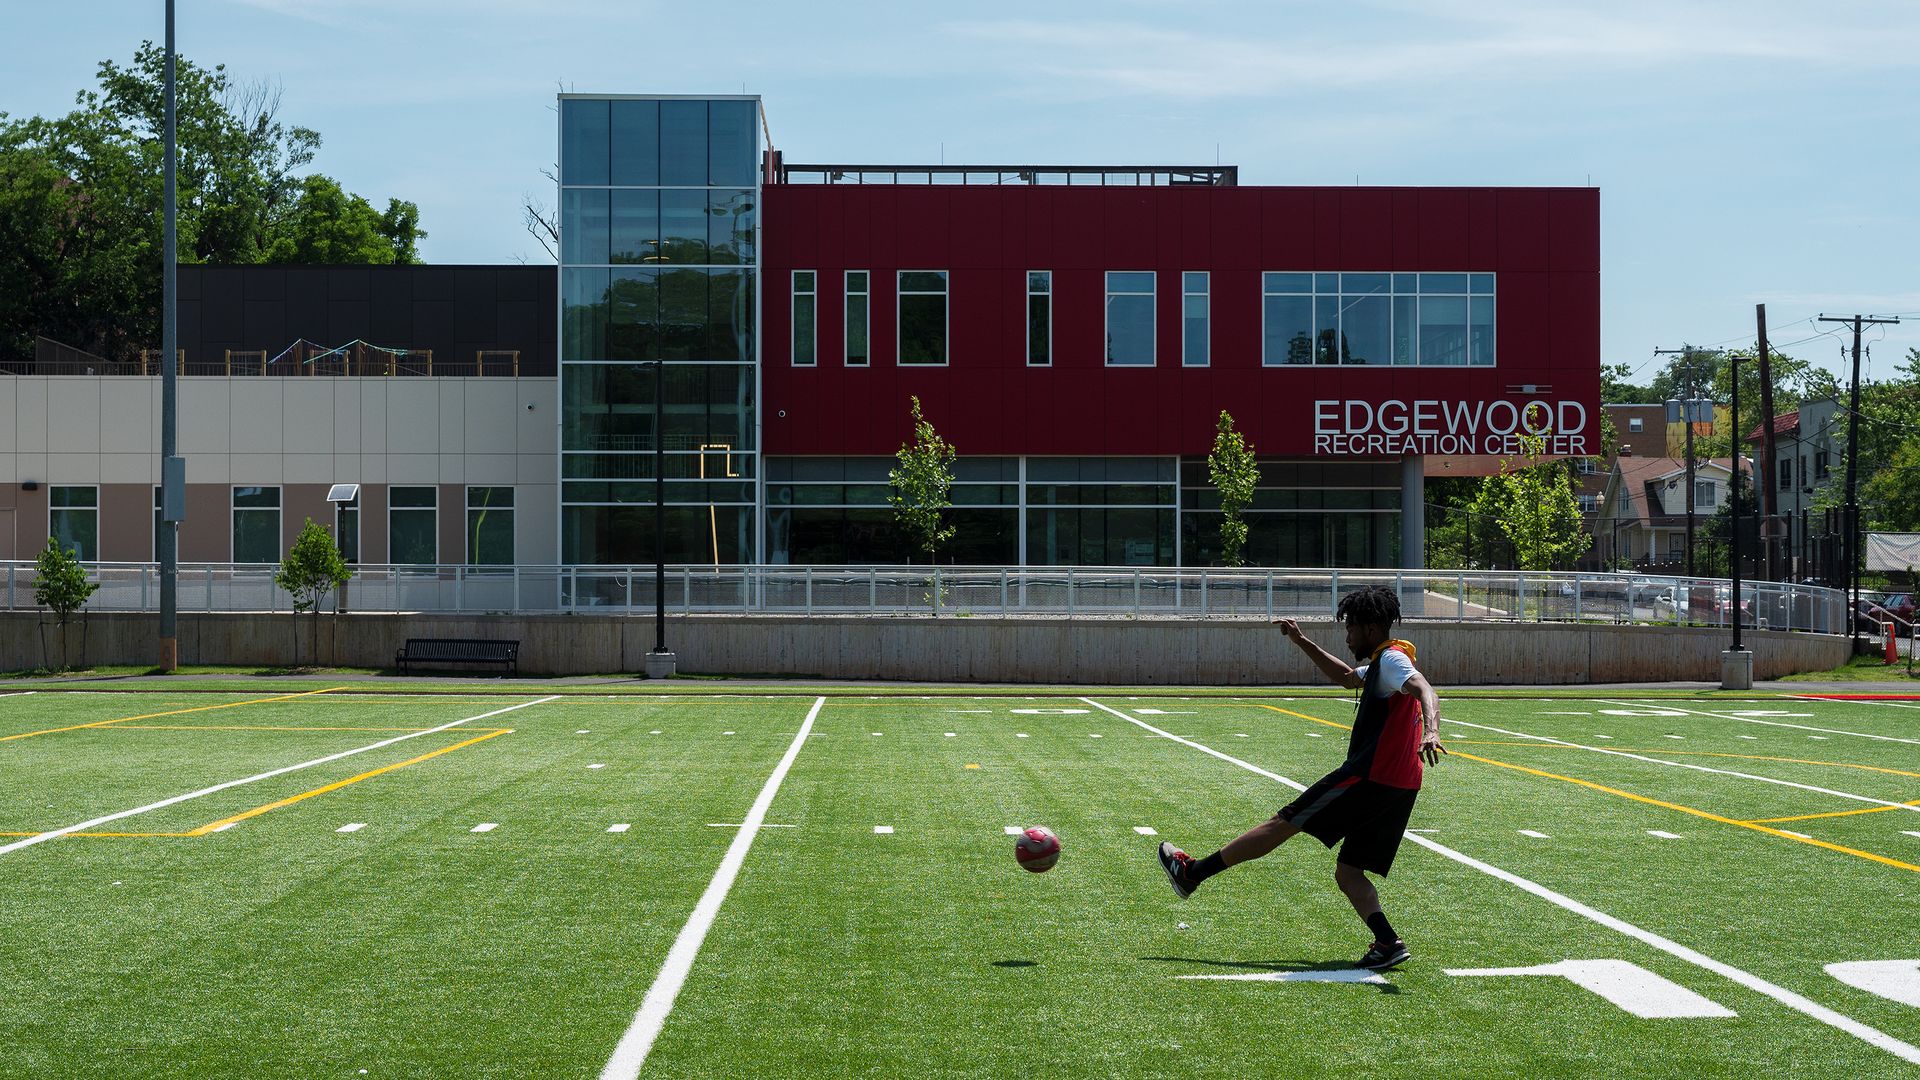 A person kicks a soccer ball on a turf field with the Edgewood Recreation Center building in the background